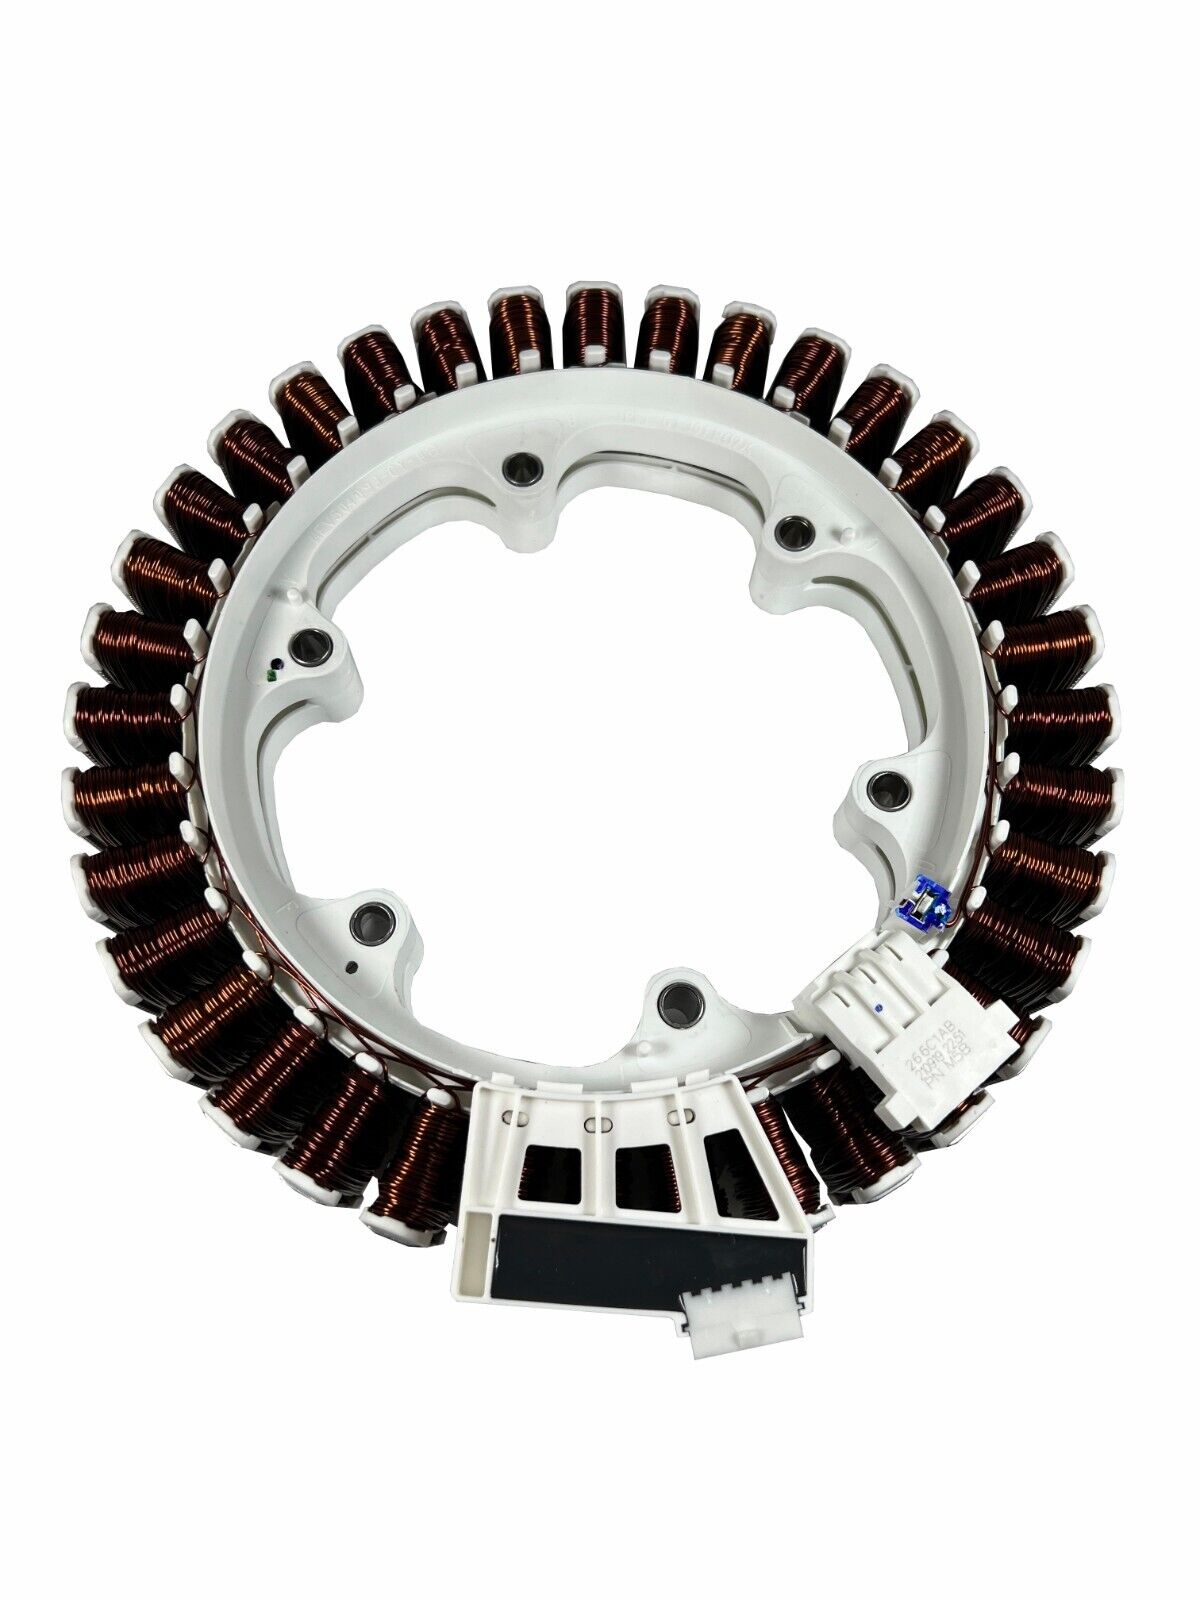 NEW ERP ER4417EA1002Y Washer Stator Assembly Replaces LG 4417EA1002Y